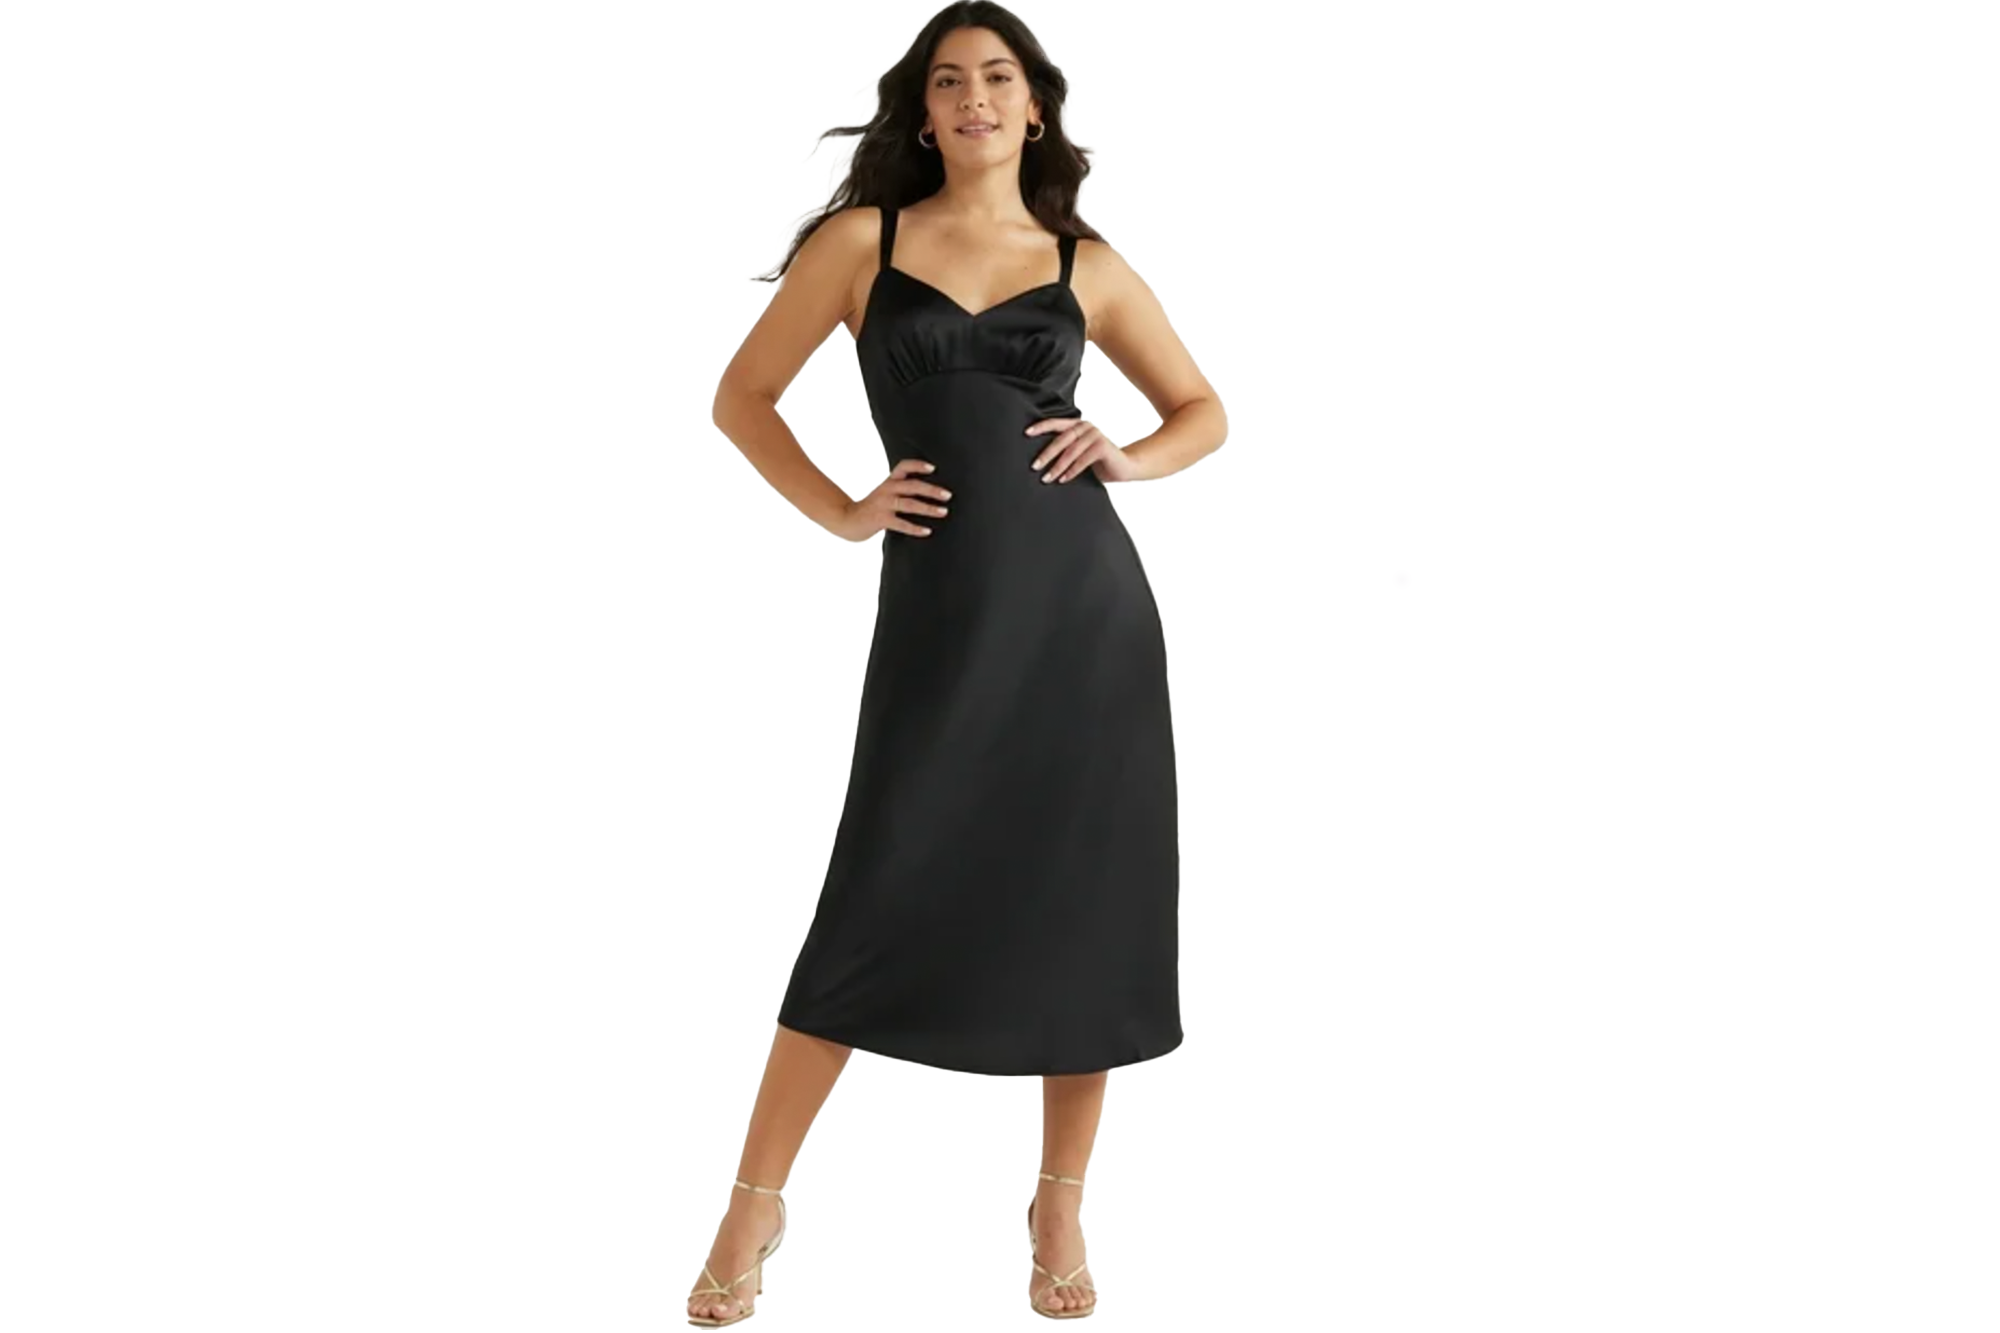 This Sofia Vergara-Approved Slip Dress Is Only $19 at Walmart